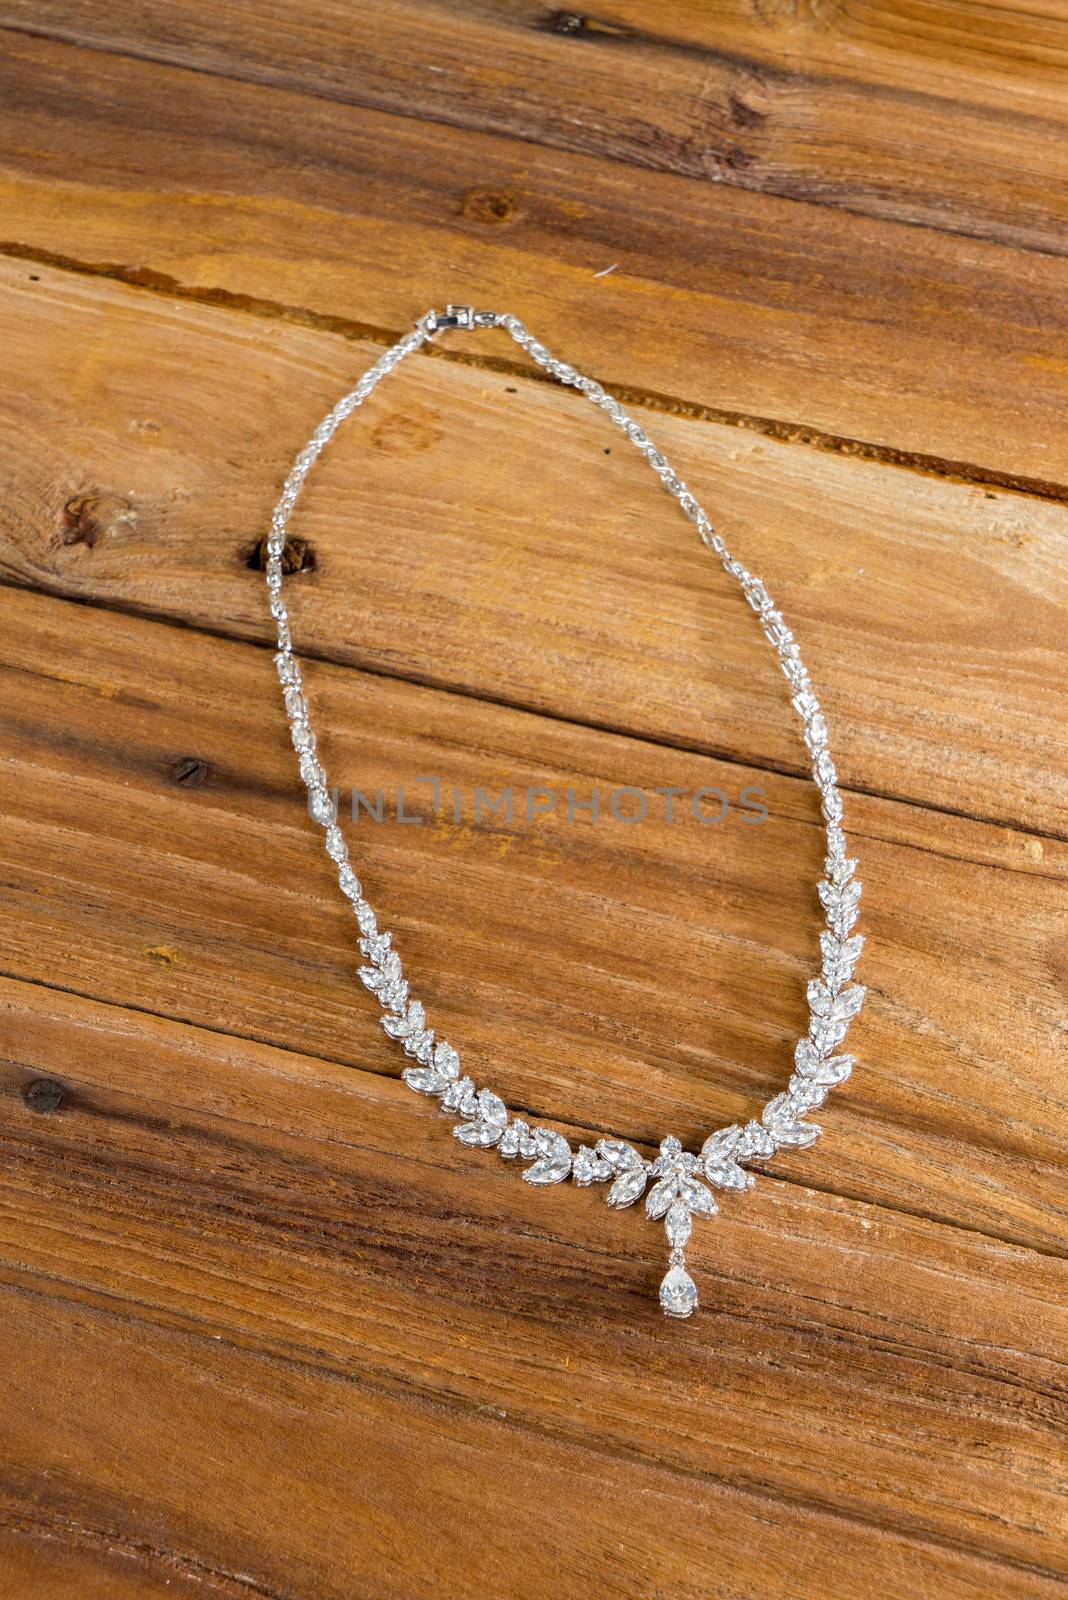 Diamond necklace on wooden background by iamway